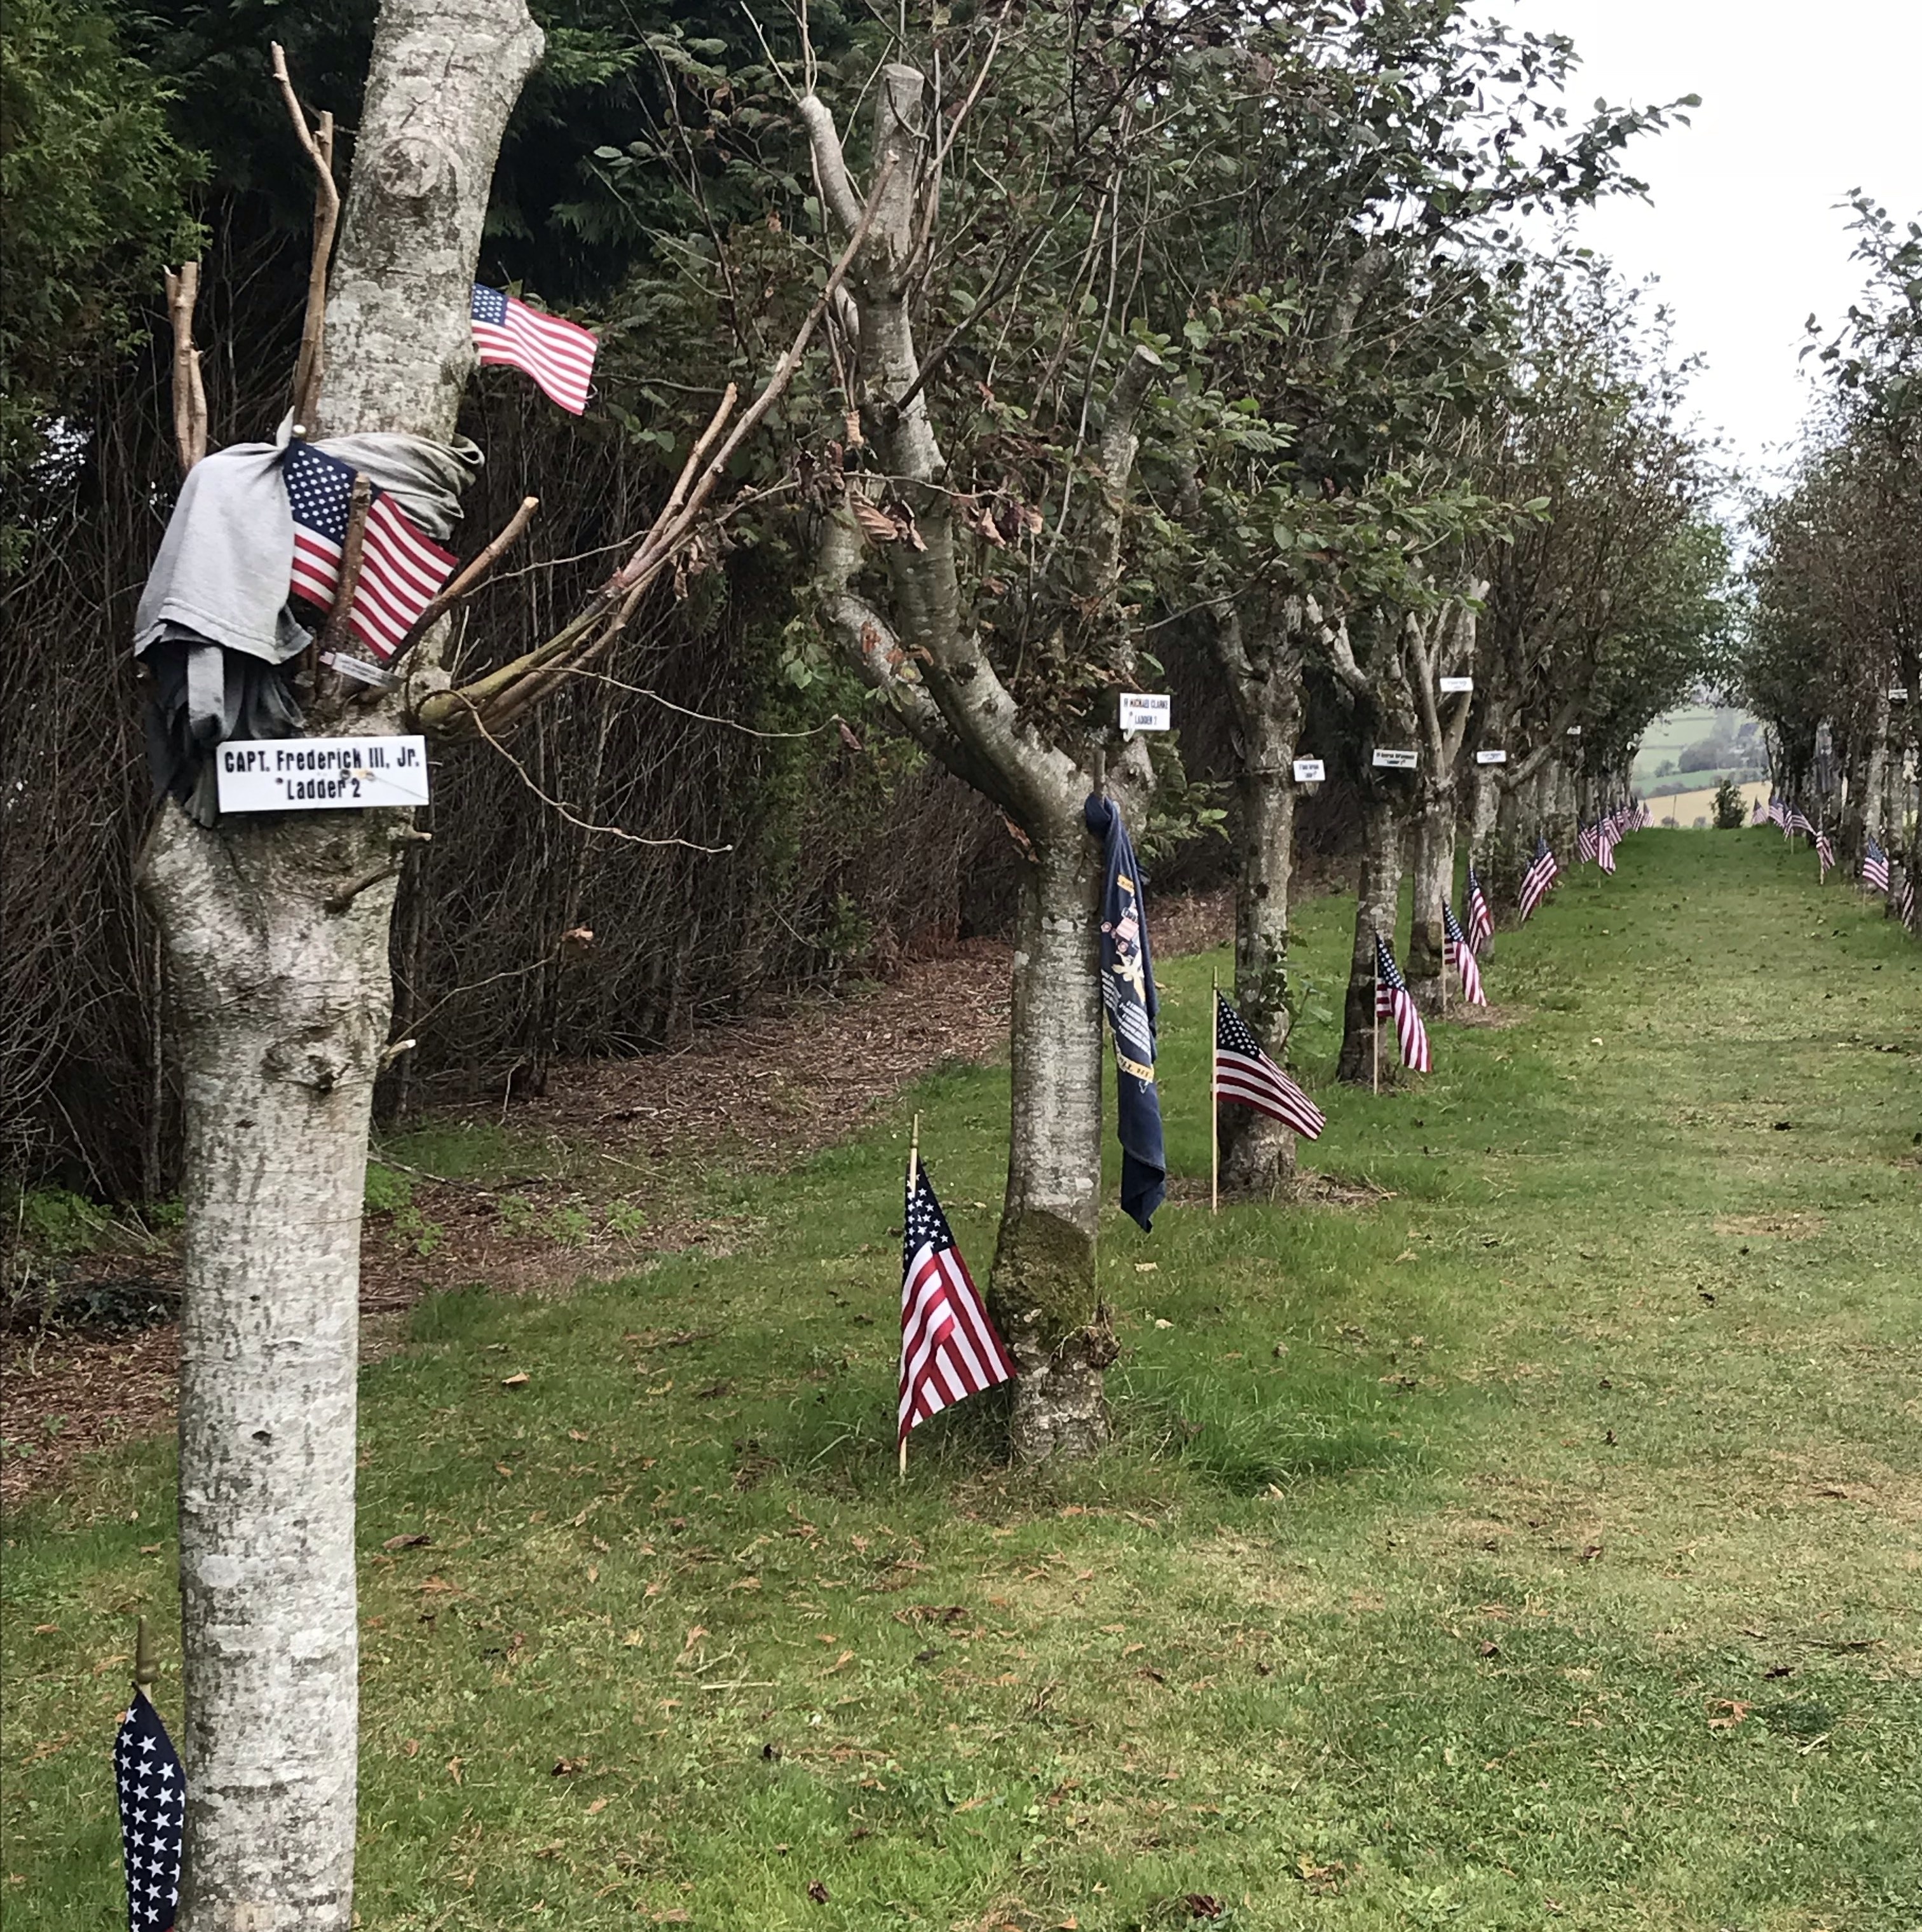 9/11 Remembered with planted trees for each Fireman lost. #Adventure